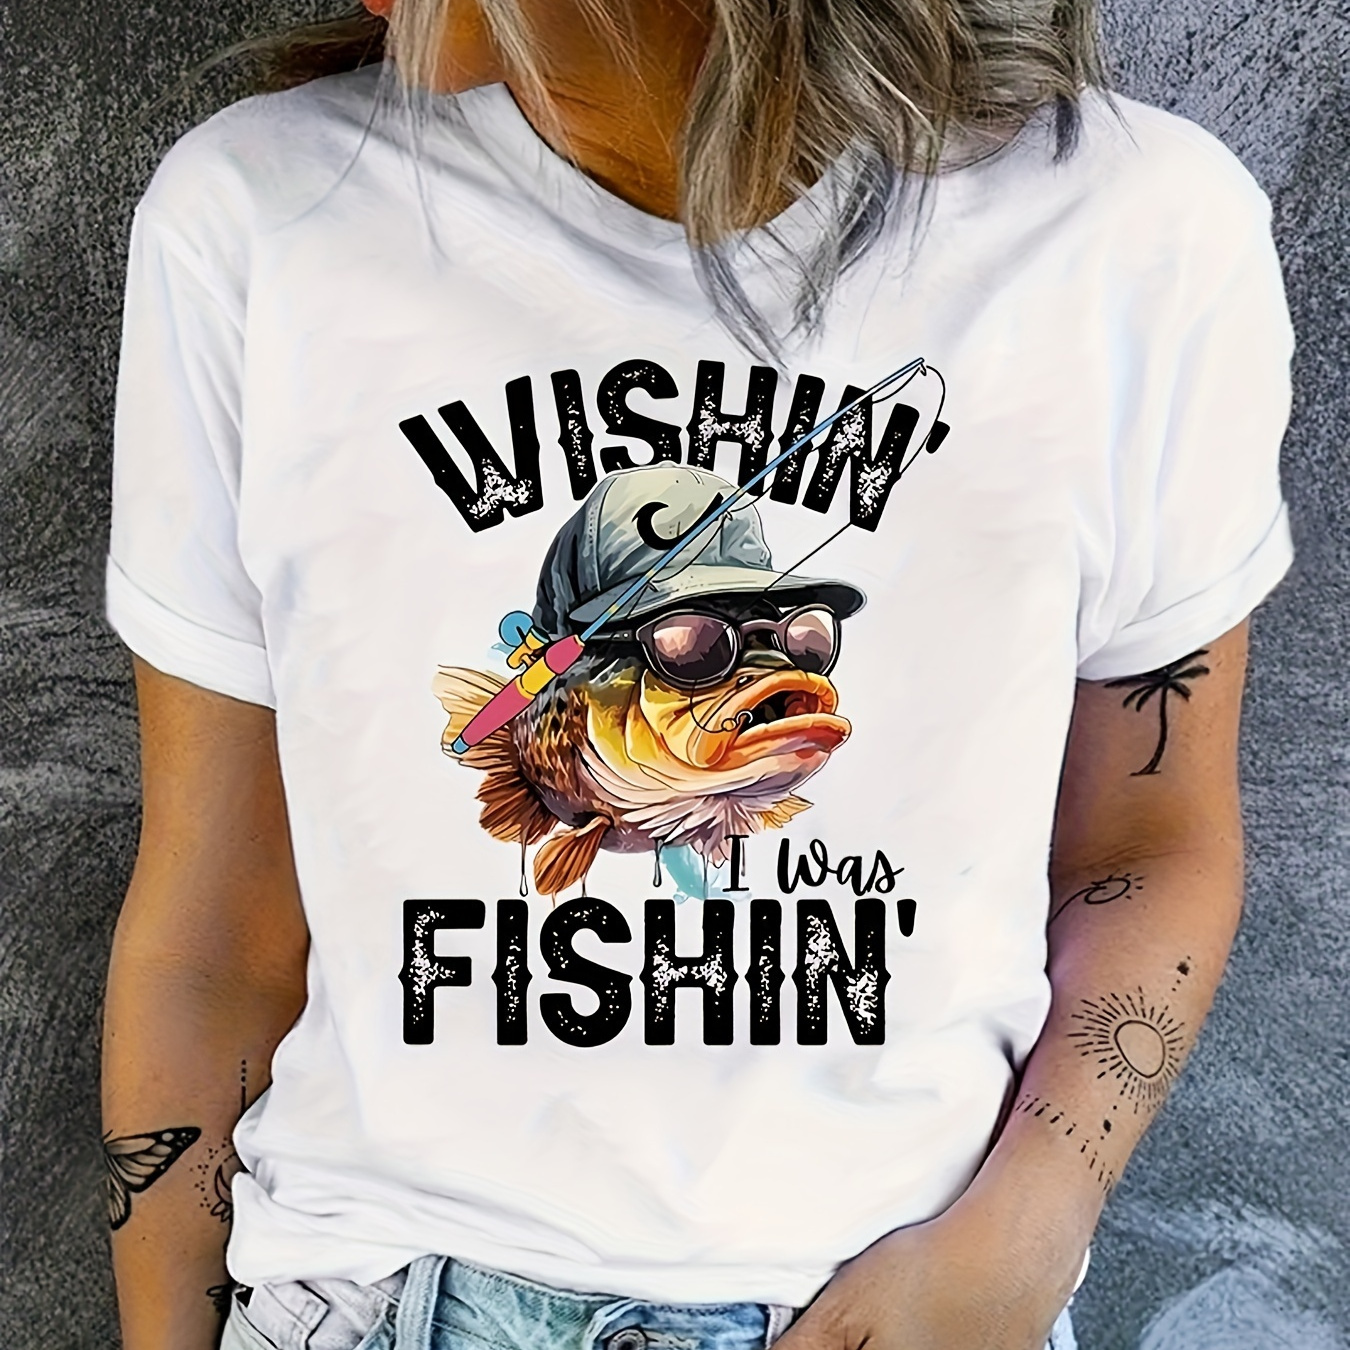 

Fish Print T-shirt, Short Sleeve Crew Neck Casual Top For Summer & Spring, Women's Clothing